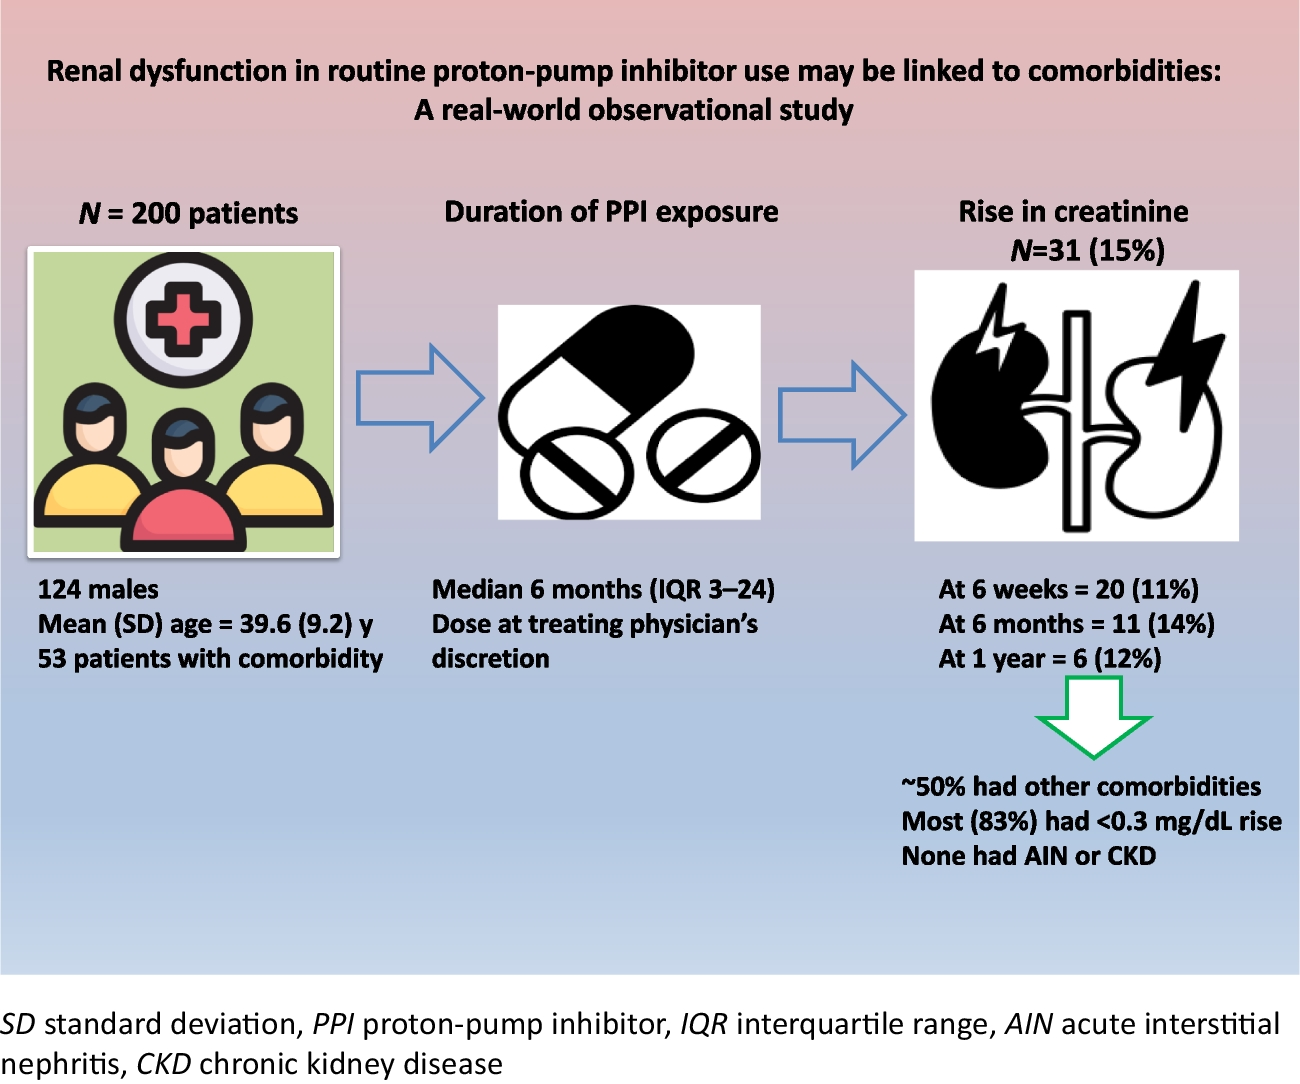 Renal dysfunction in routine proton-pump inhibitor use may be linked to comorbidities: A real-world observational study